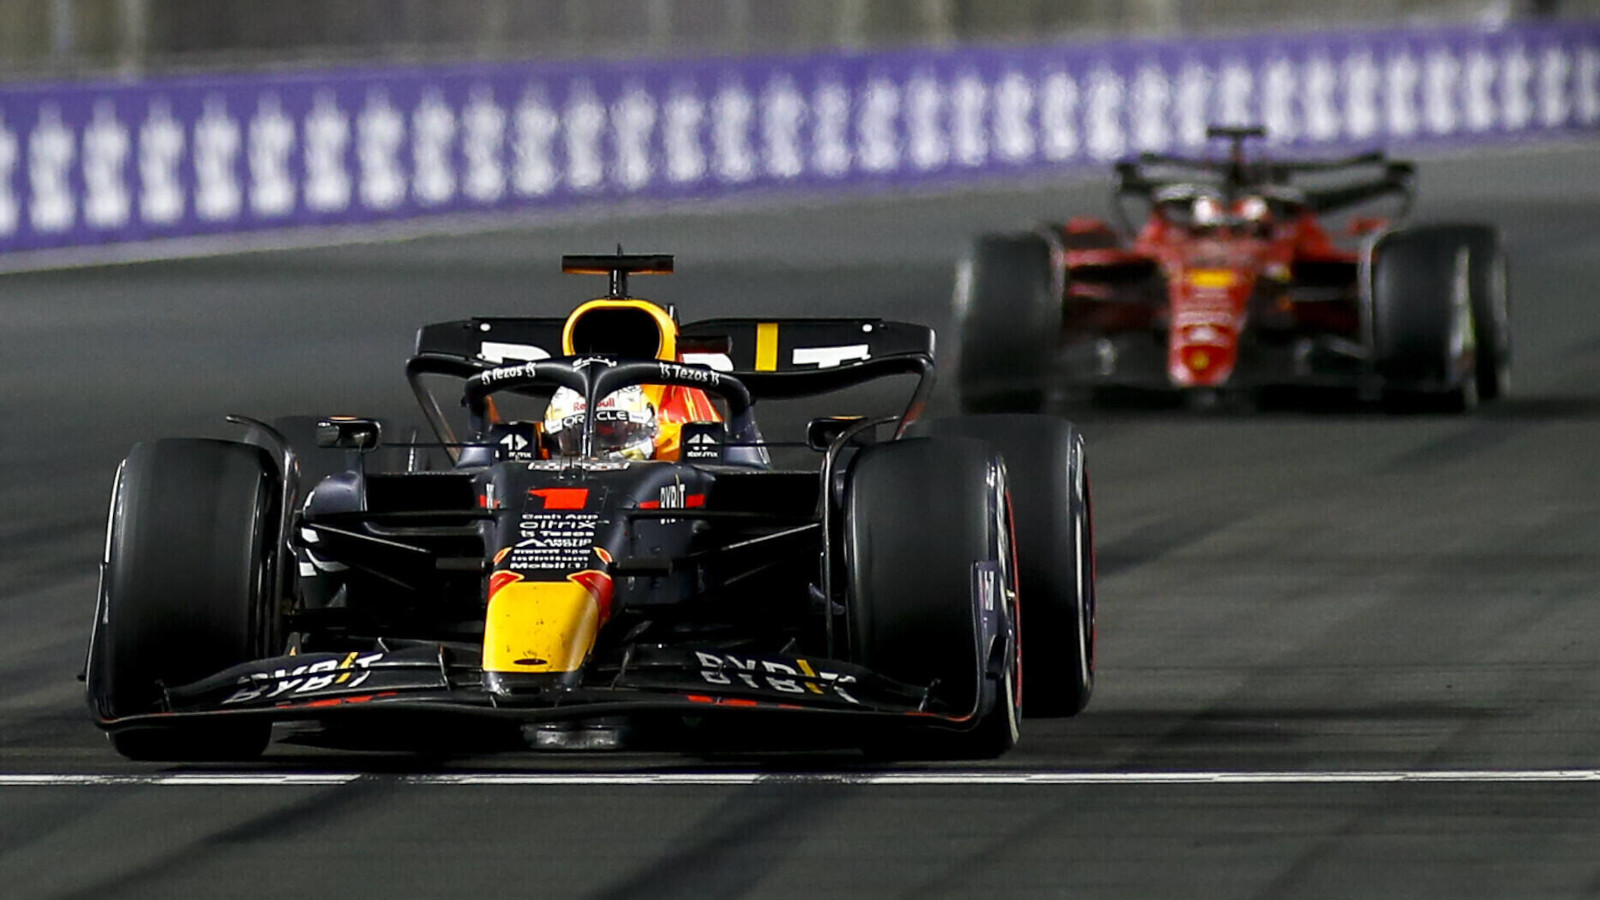 Max Verstappen chased by Charles Leclerc. Saudi Arabia March 2022